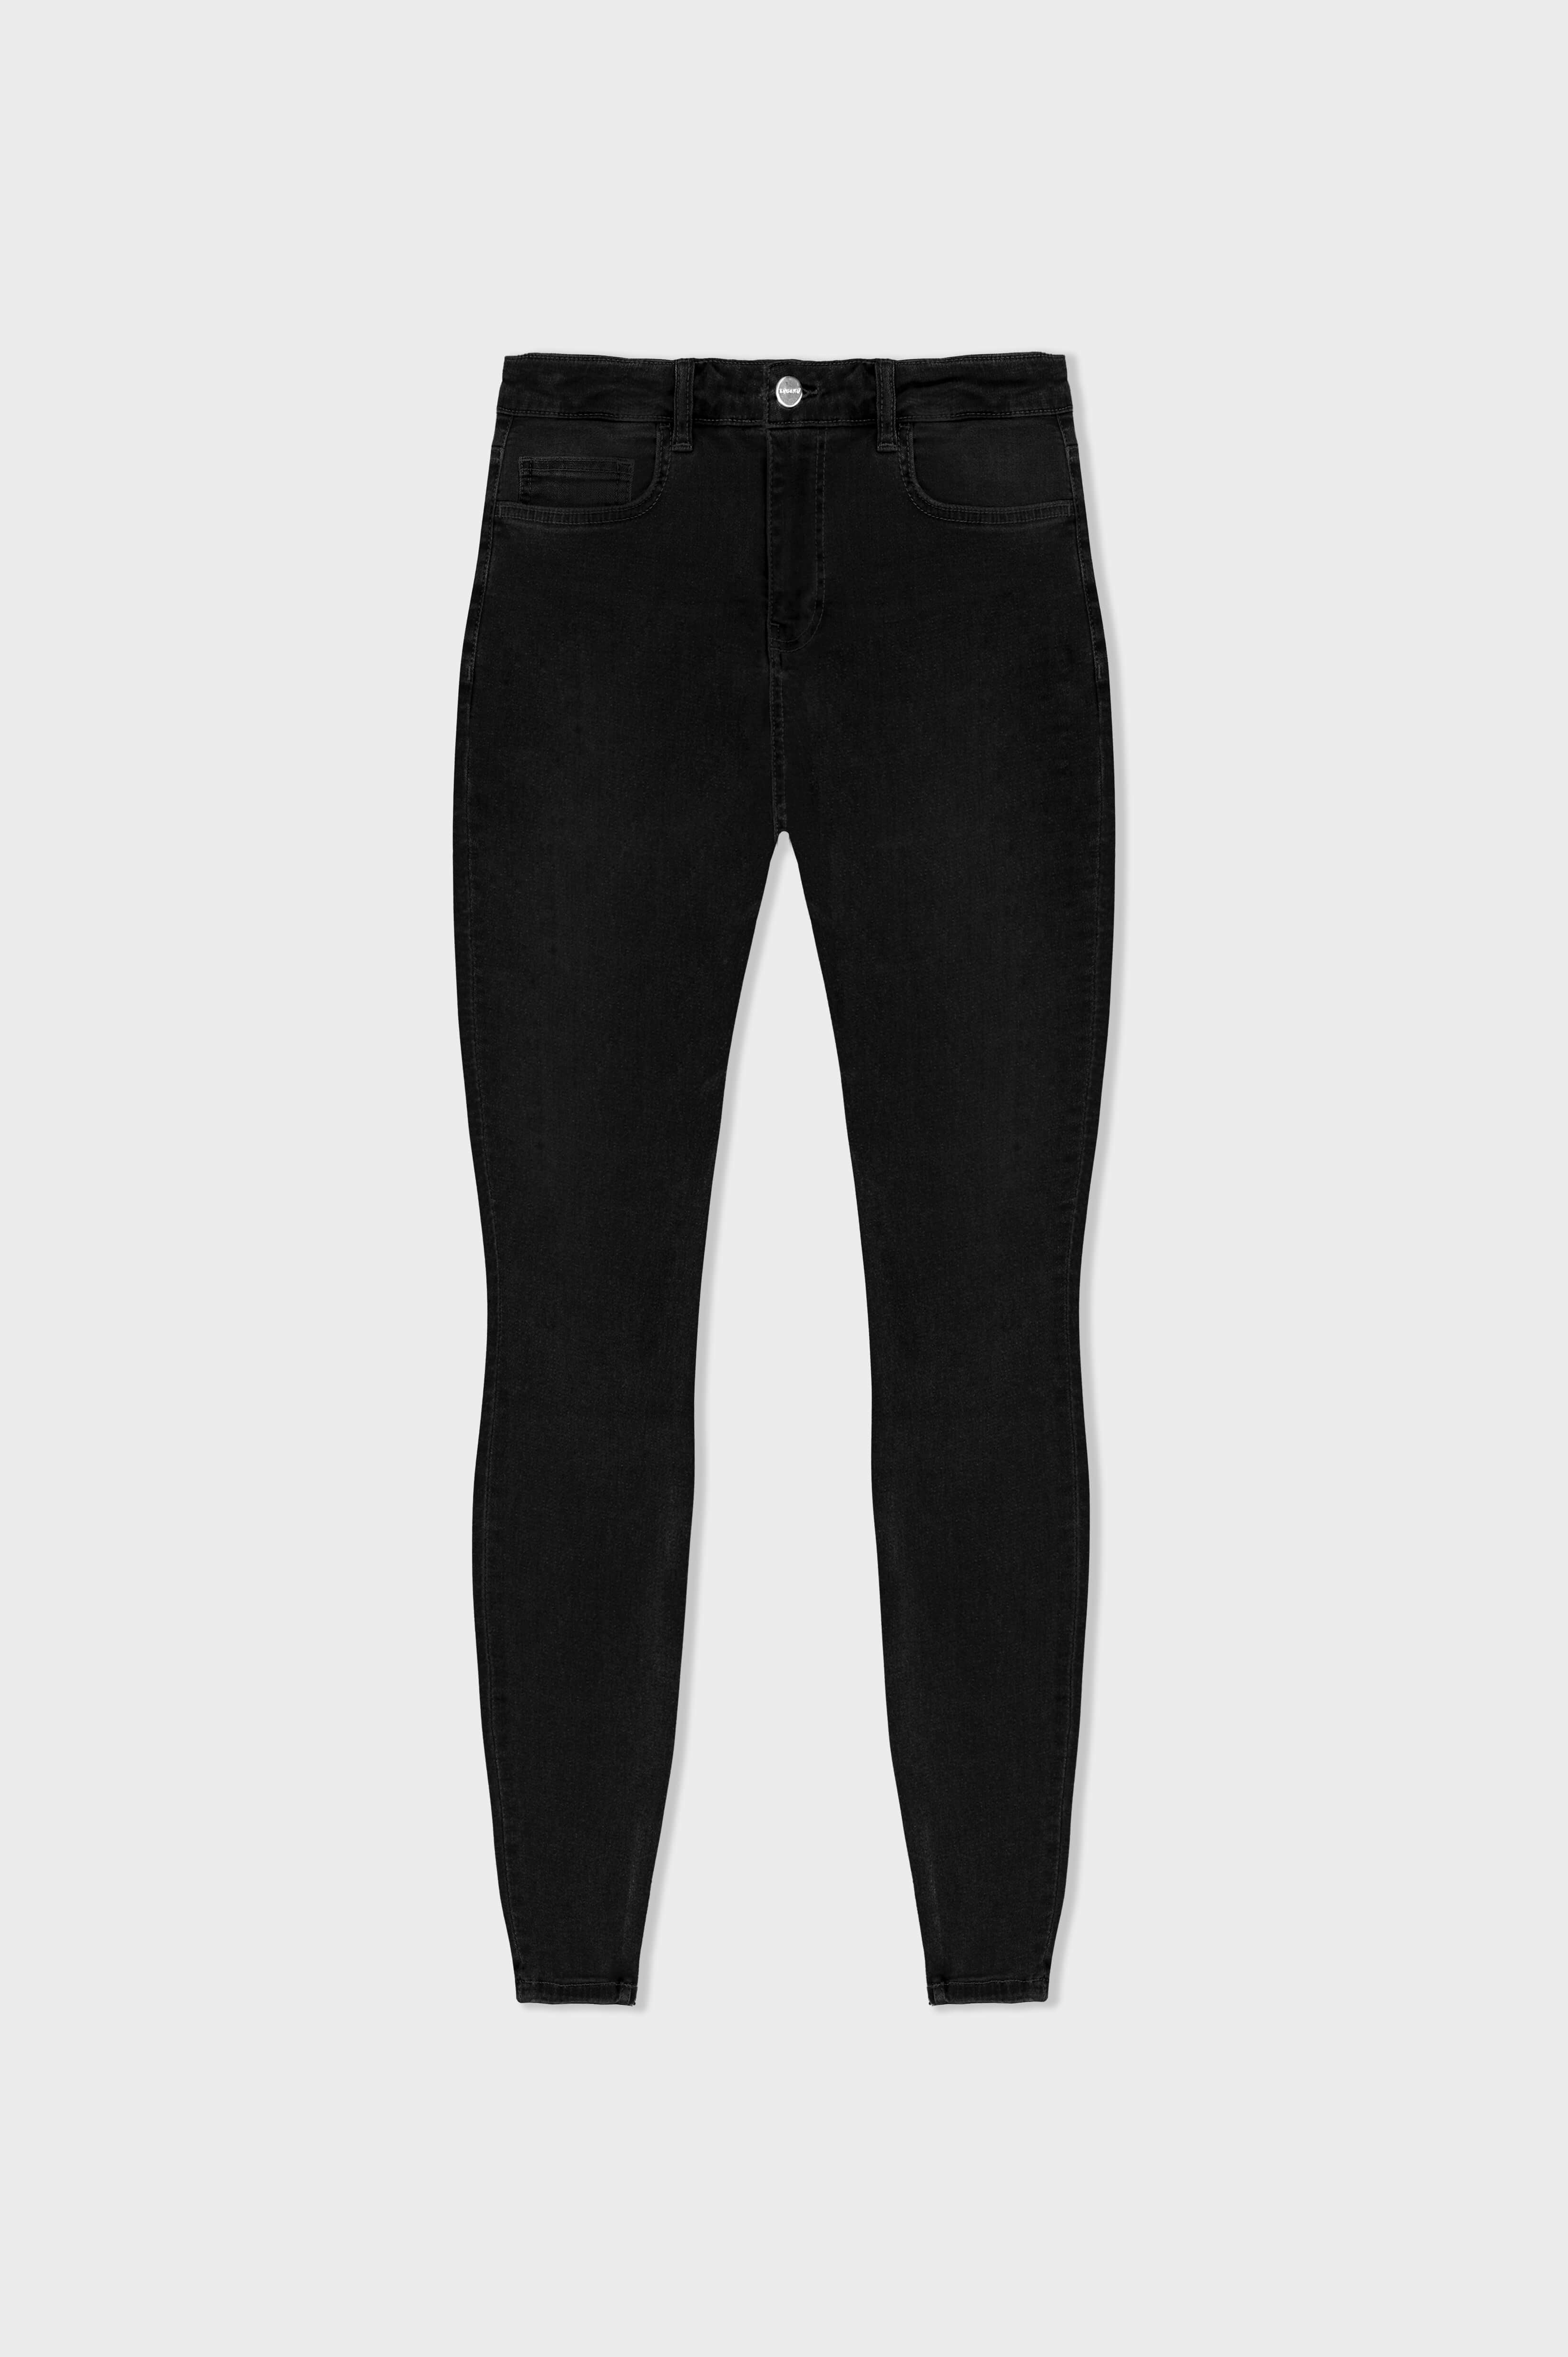 Legend London Jeans - spray on BLACK JEANS - NON RIPPED